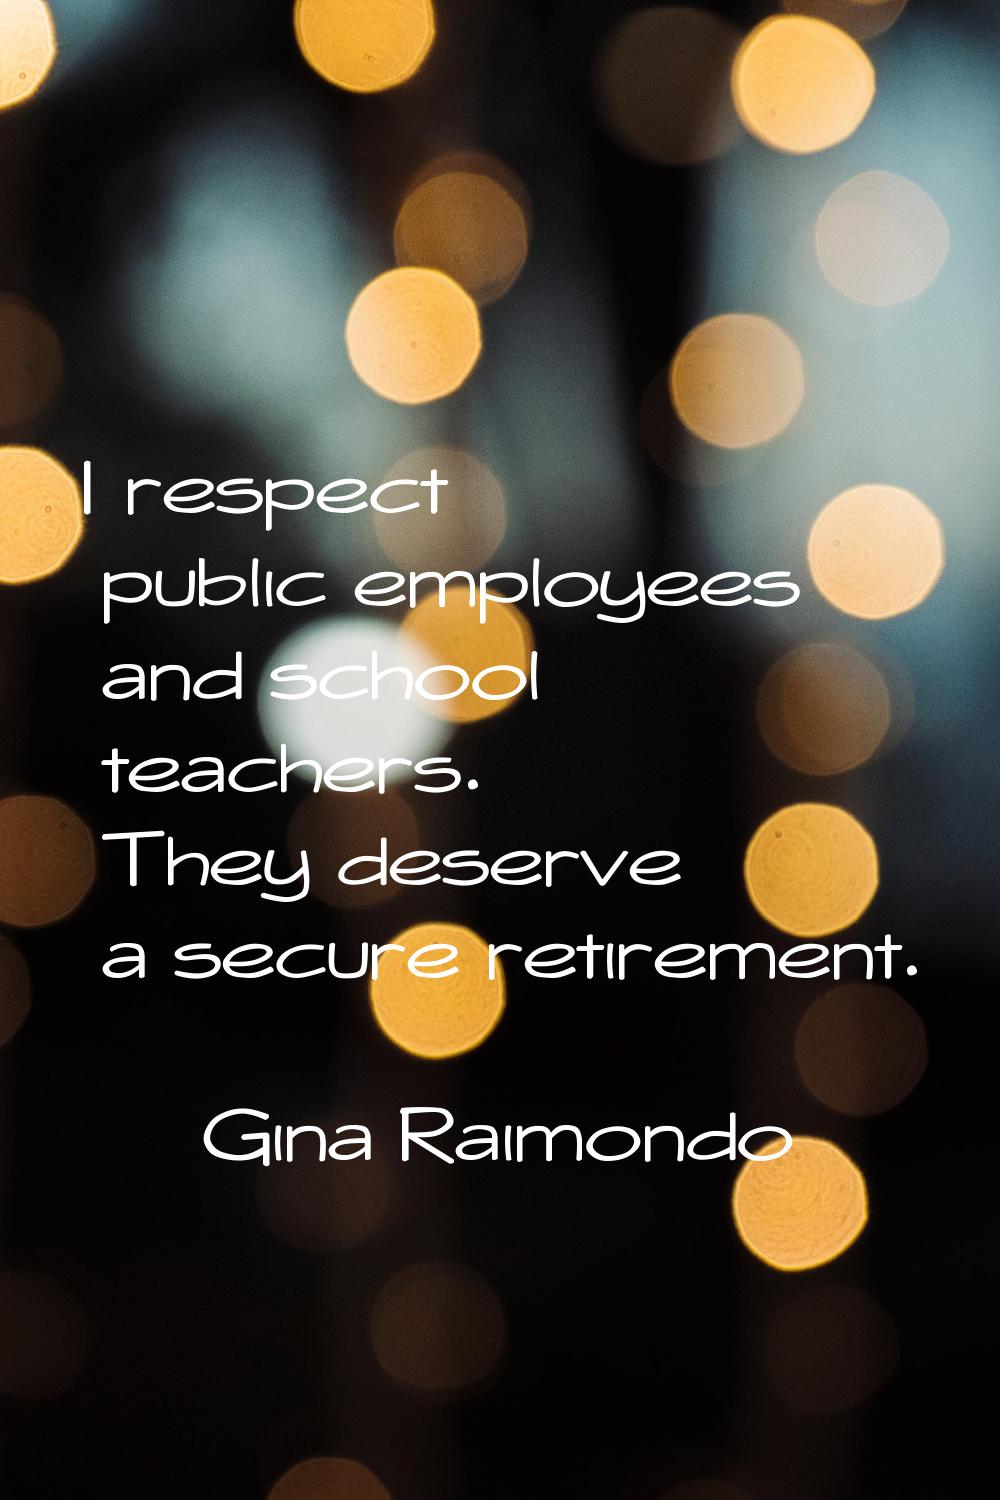 I respect public employees and school teachers. They deserve a secure retirement.